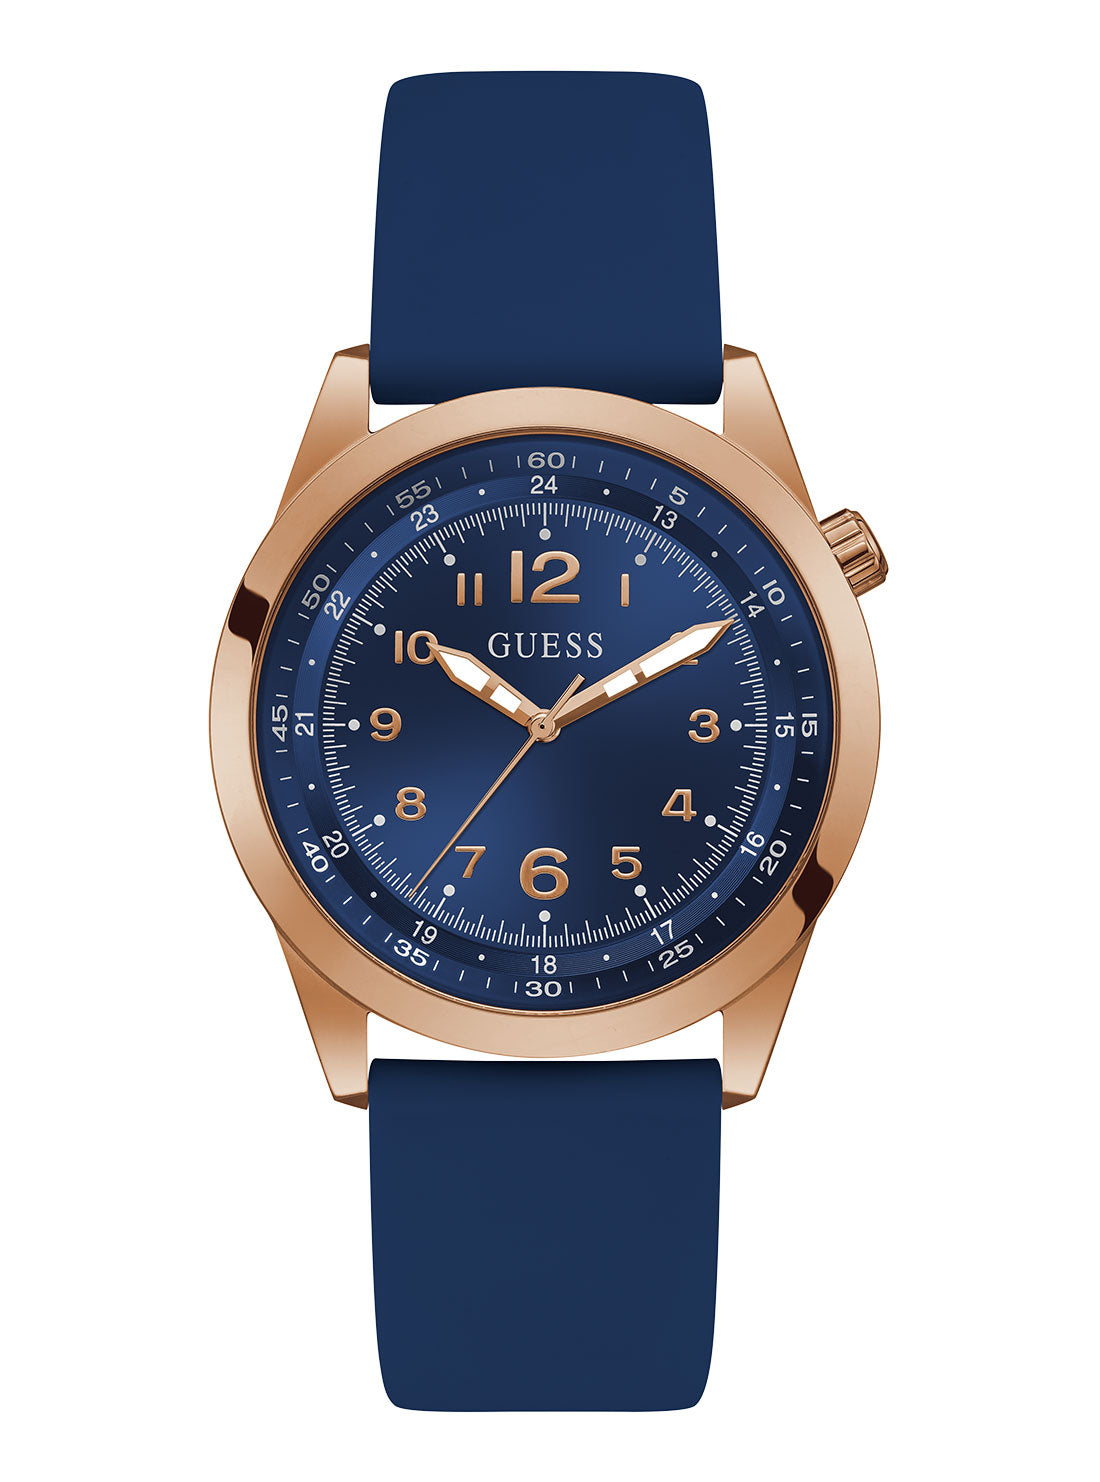 GUESS Men's Blue Max Silicone Watch GW0494G5 Front View